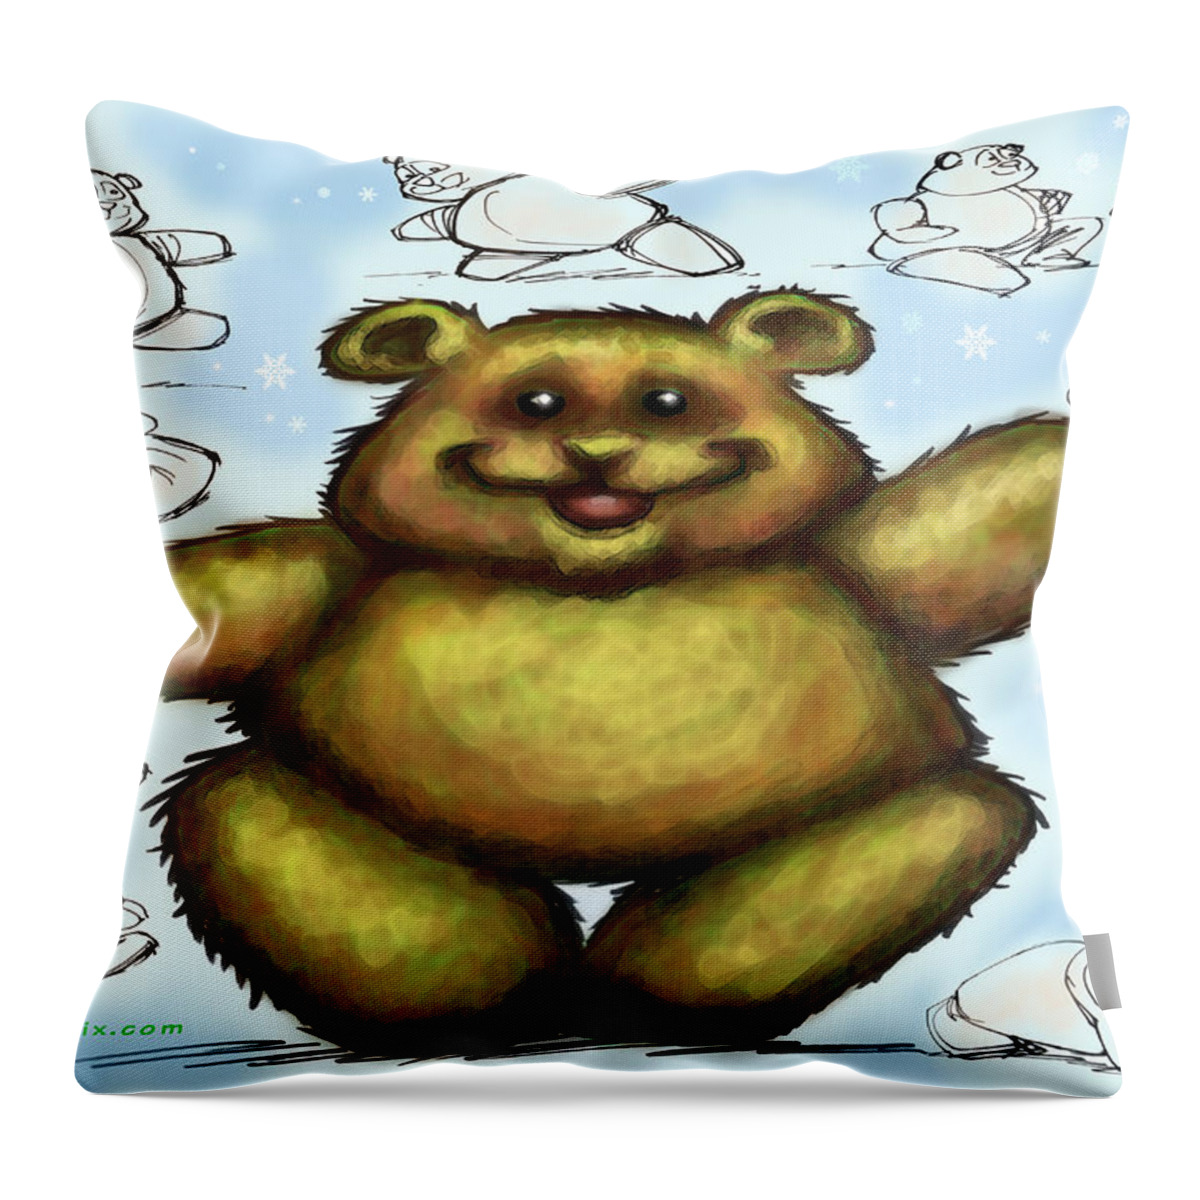 Bear Throw Pillow featuring the painting Teddy Bear by Kevin Middleton